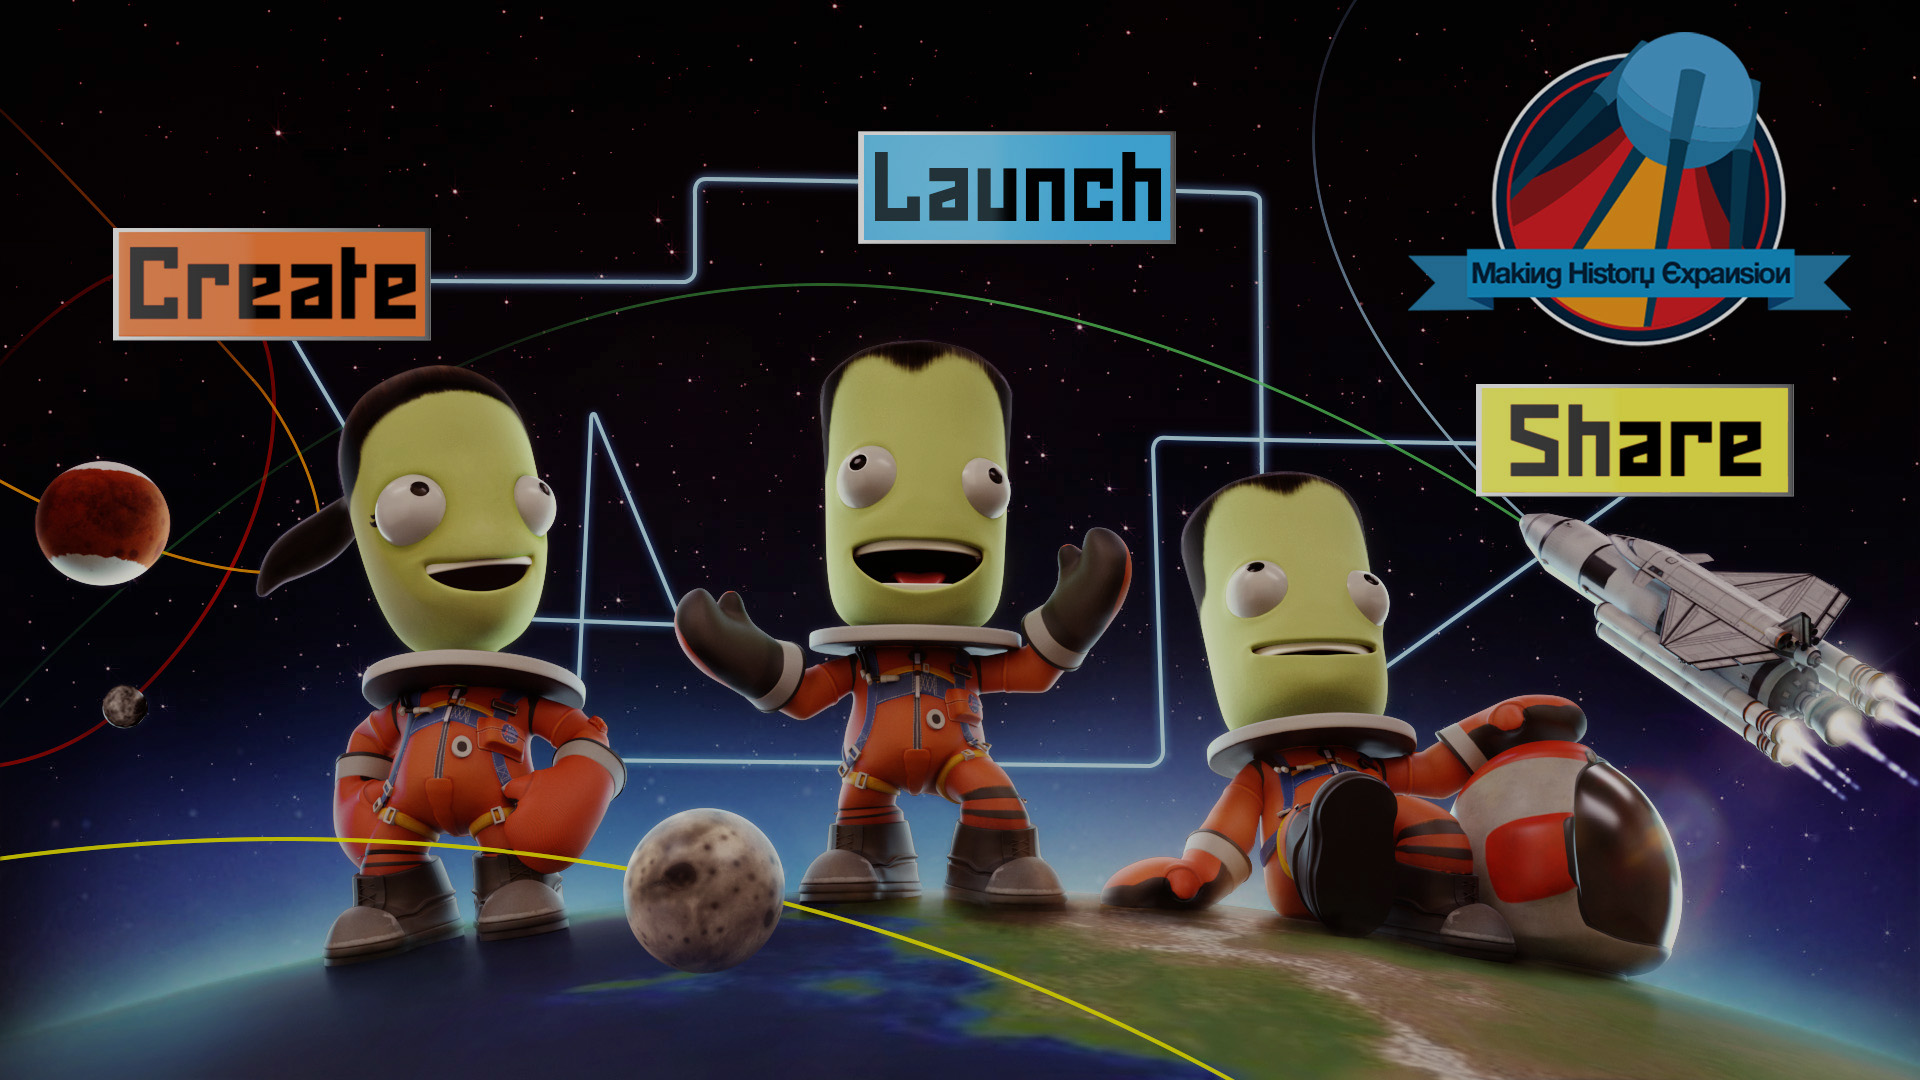 space launch games